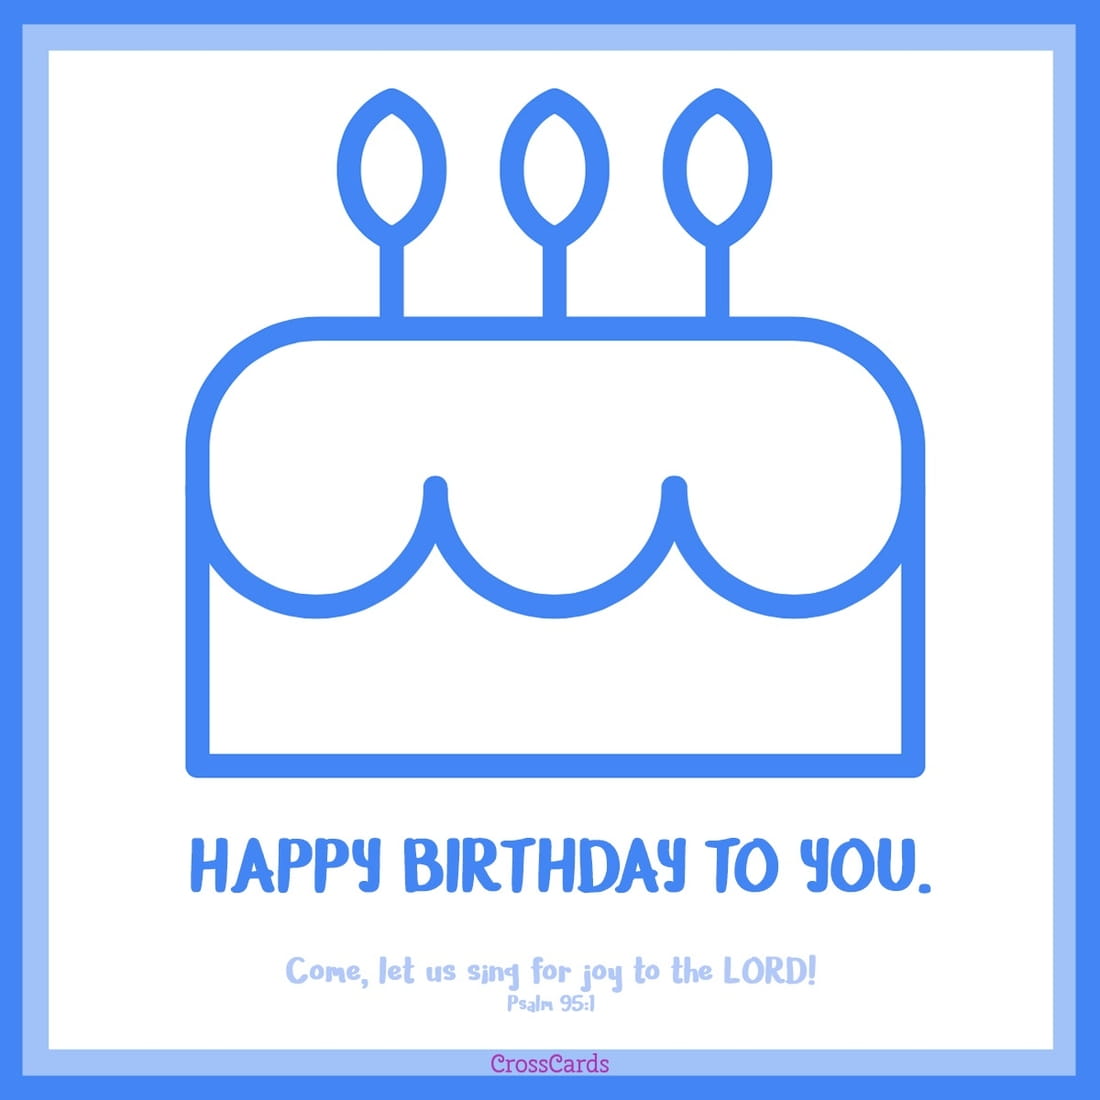 Happy Birthday to You! ecard, online card